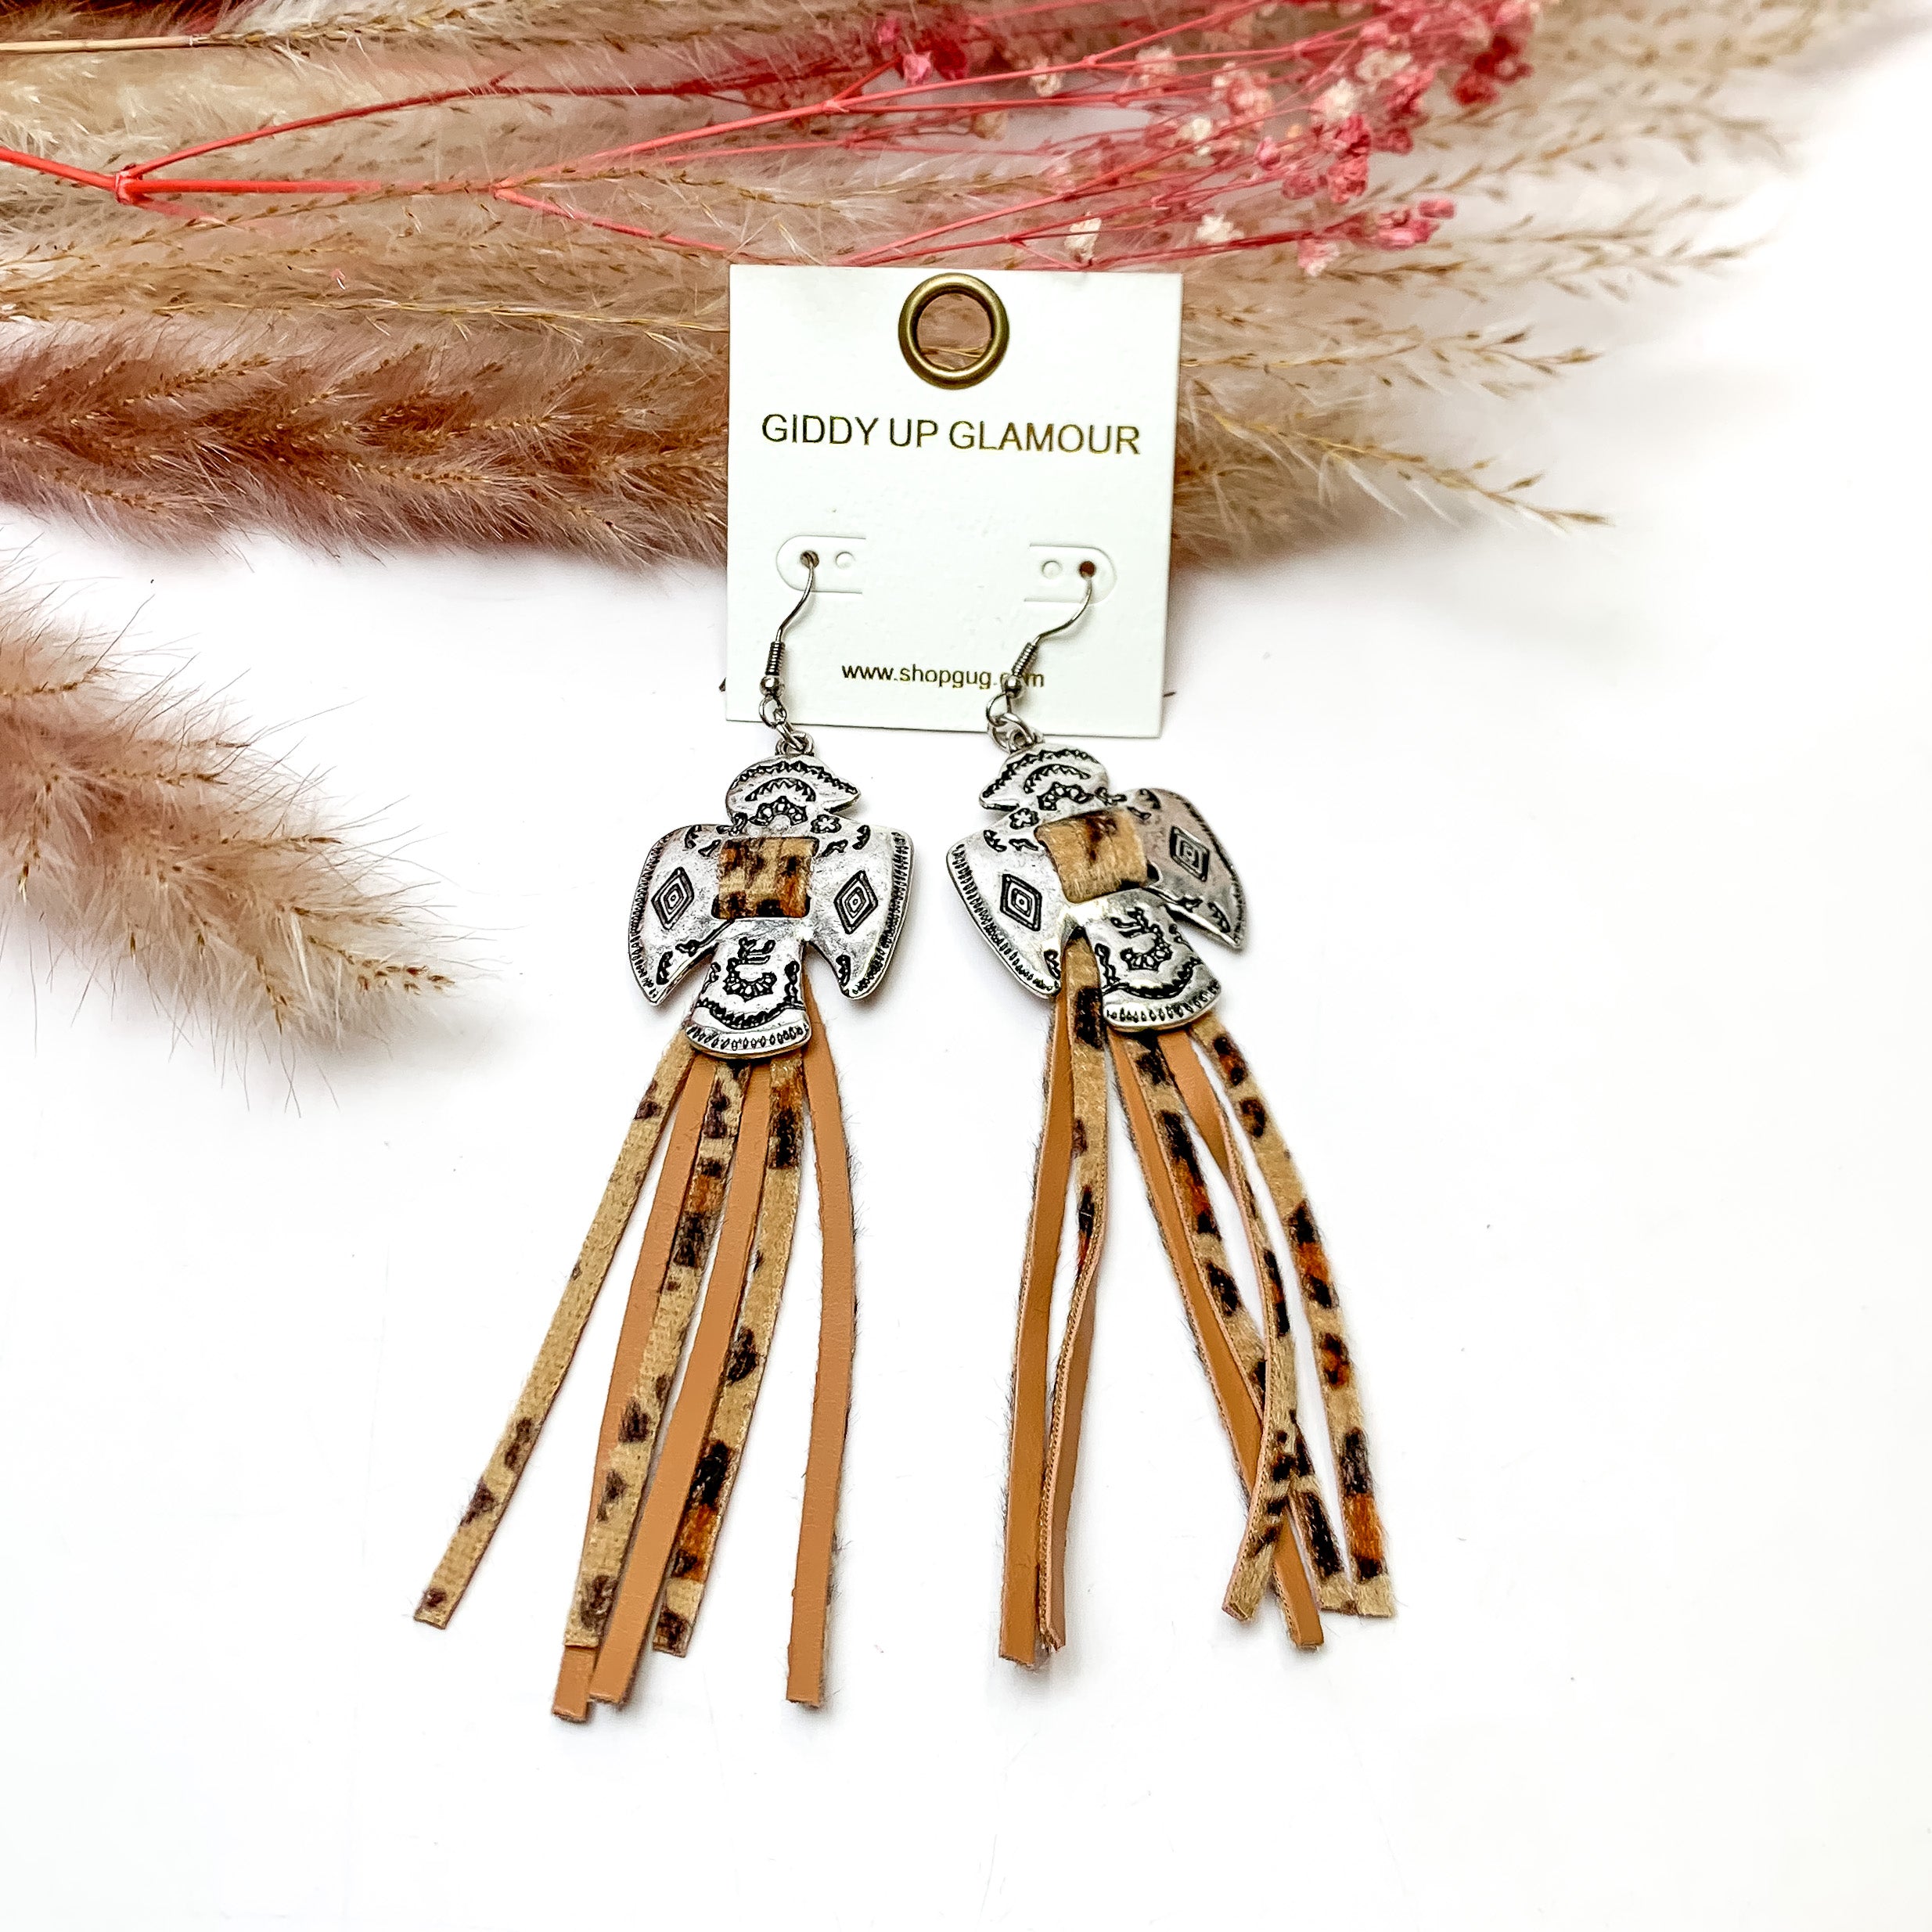 Thunderbird Tassel Earrings in Leopard. These earrings are pictured on a white background with flowers behind for decoration.